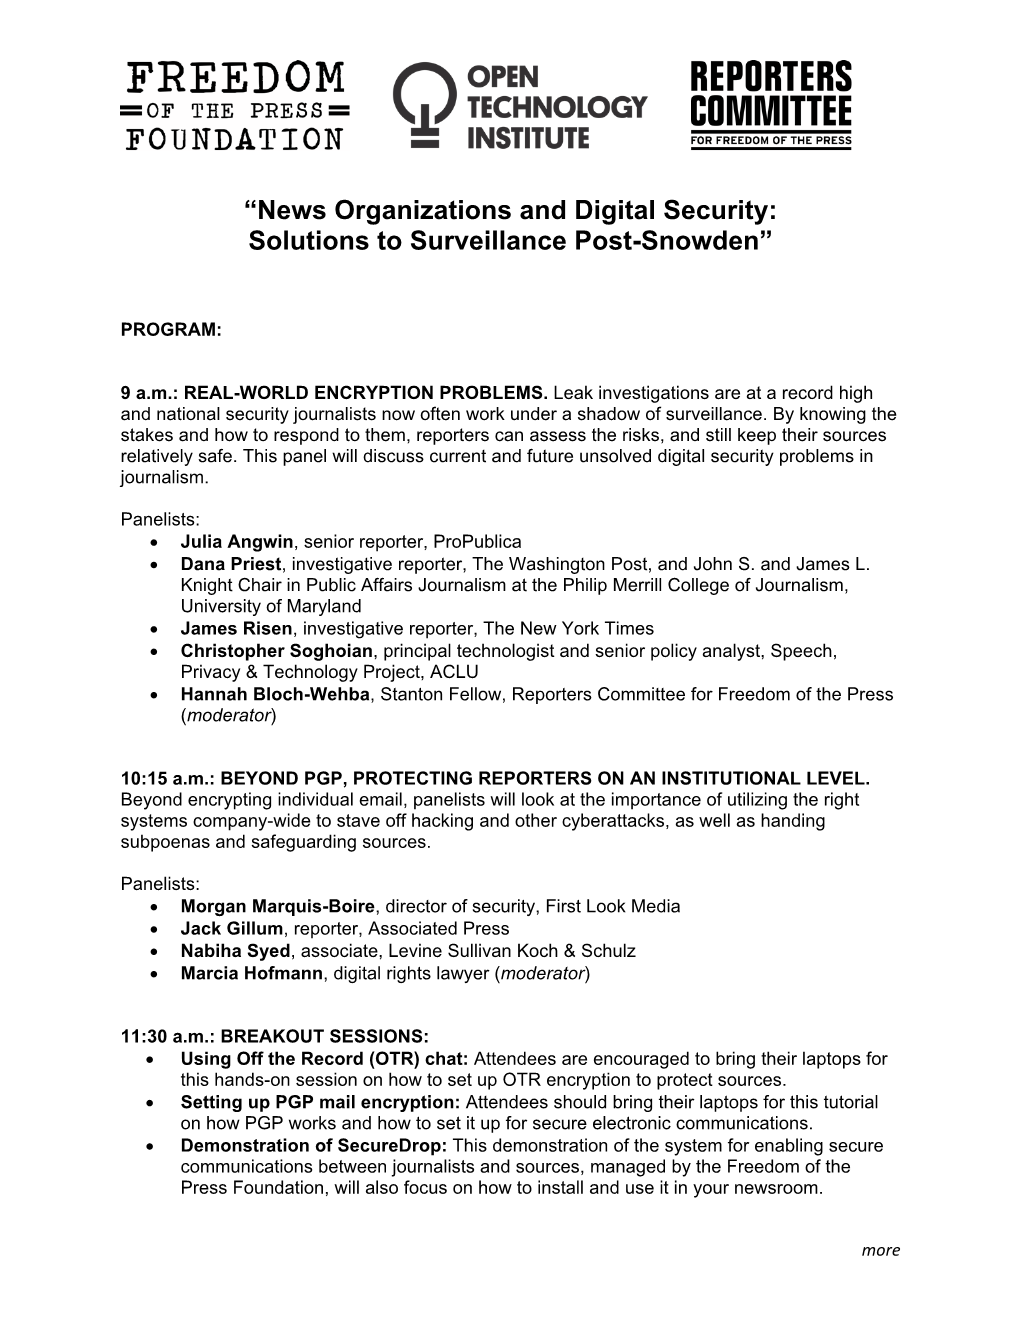 “News Organizations and Digital Security: Solutions to Surveillance Post-Snowden”